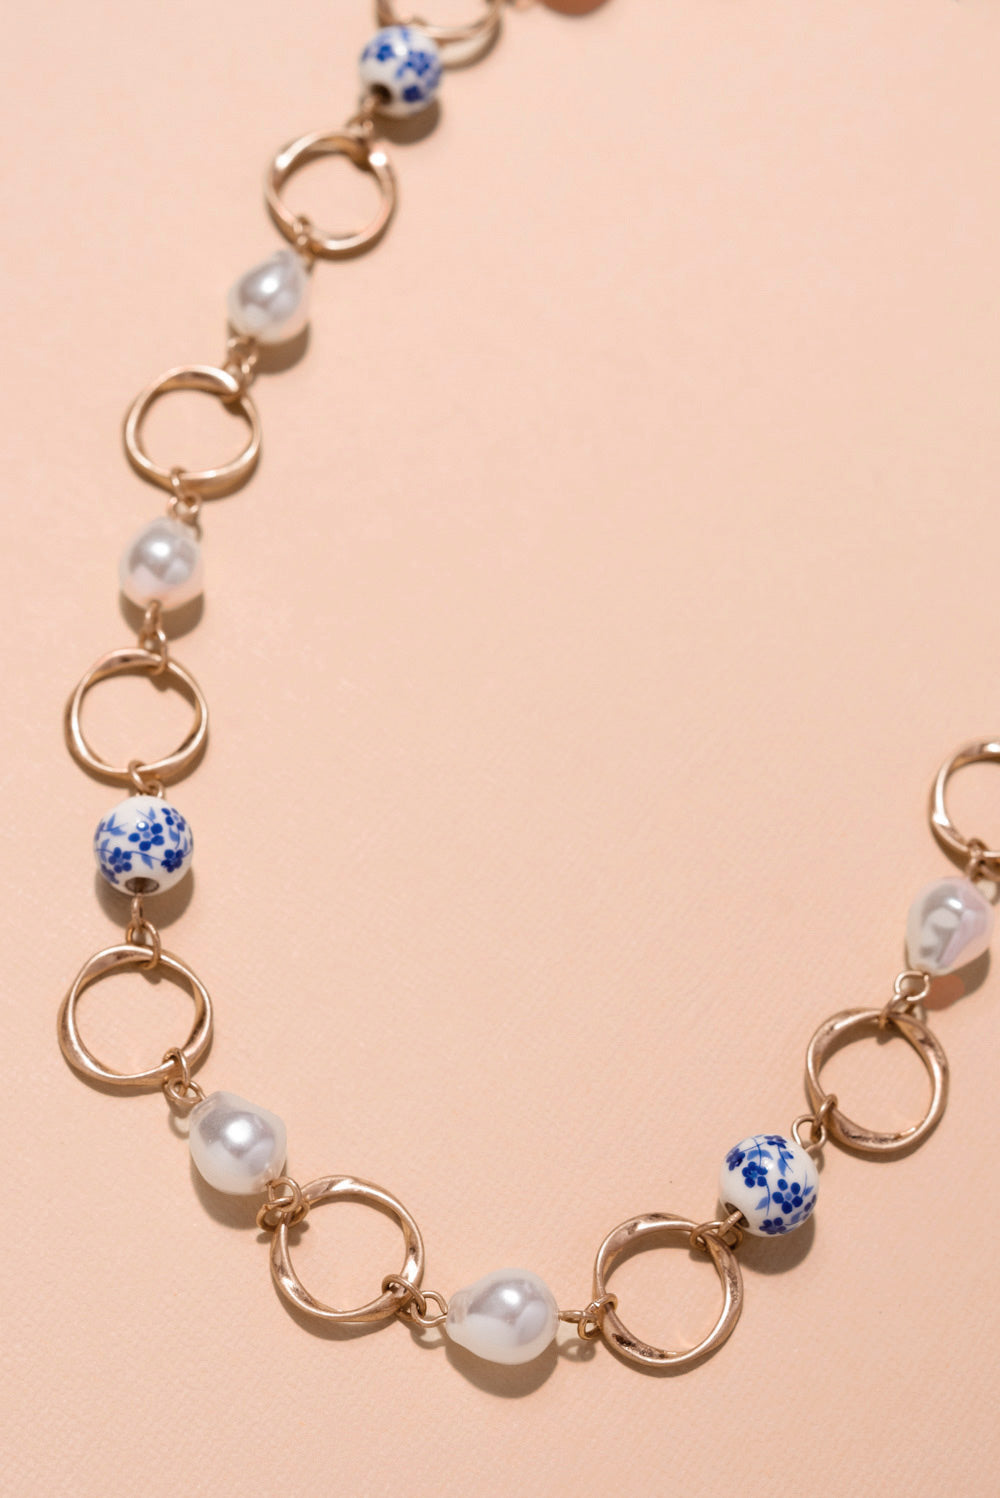 Type 1 Fine China Necklace